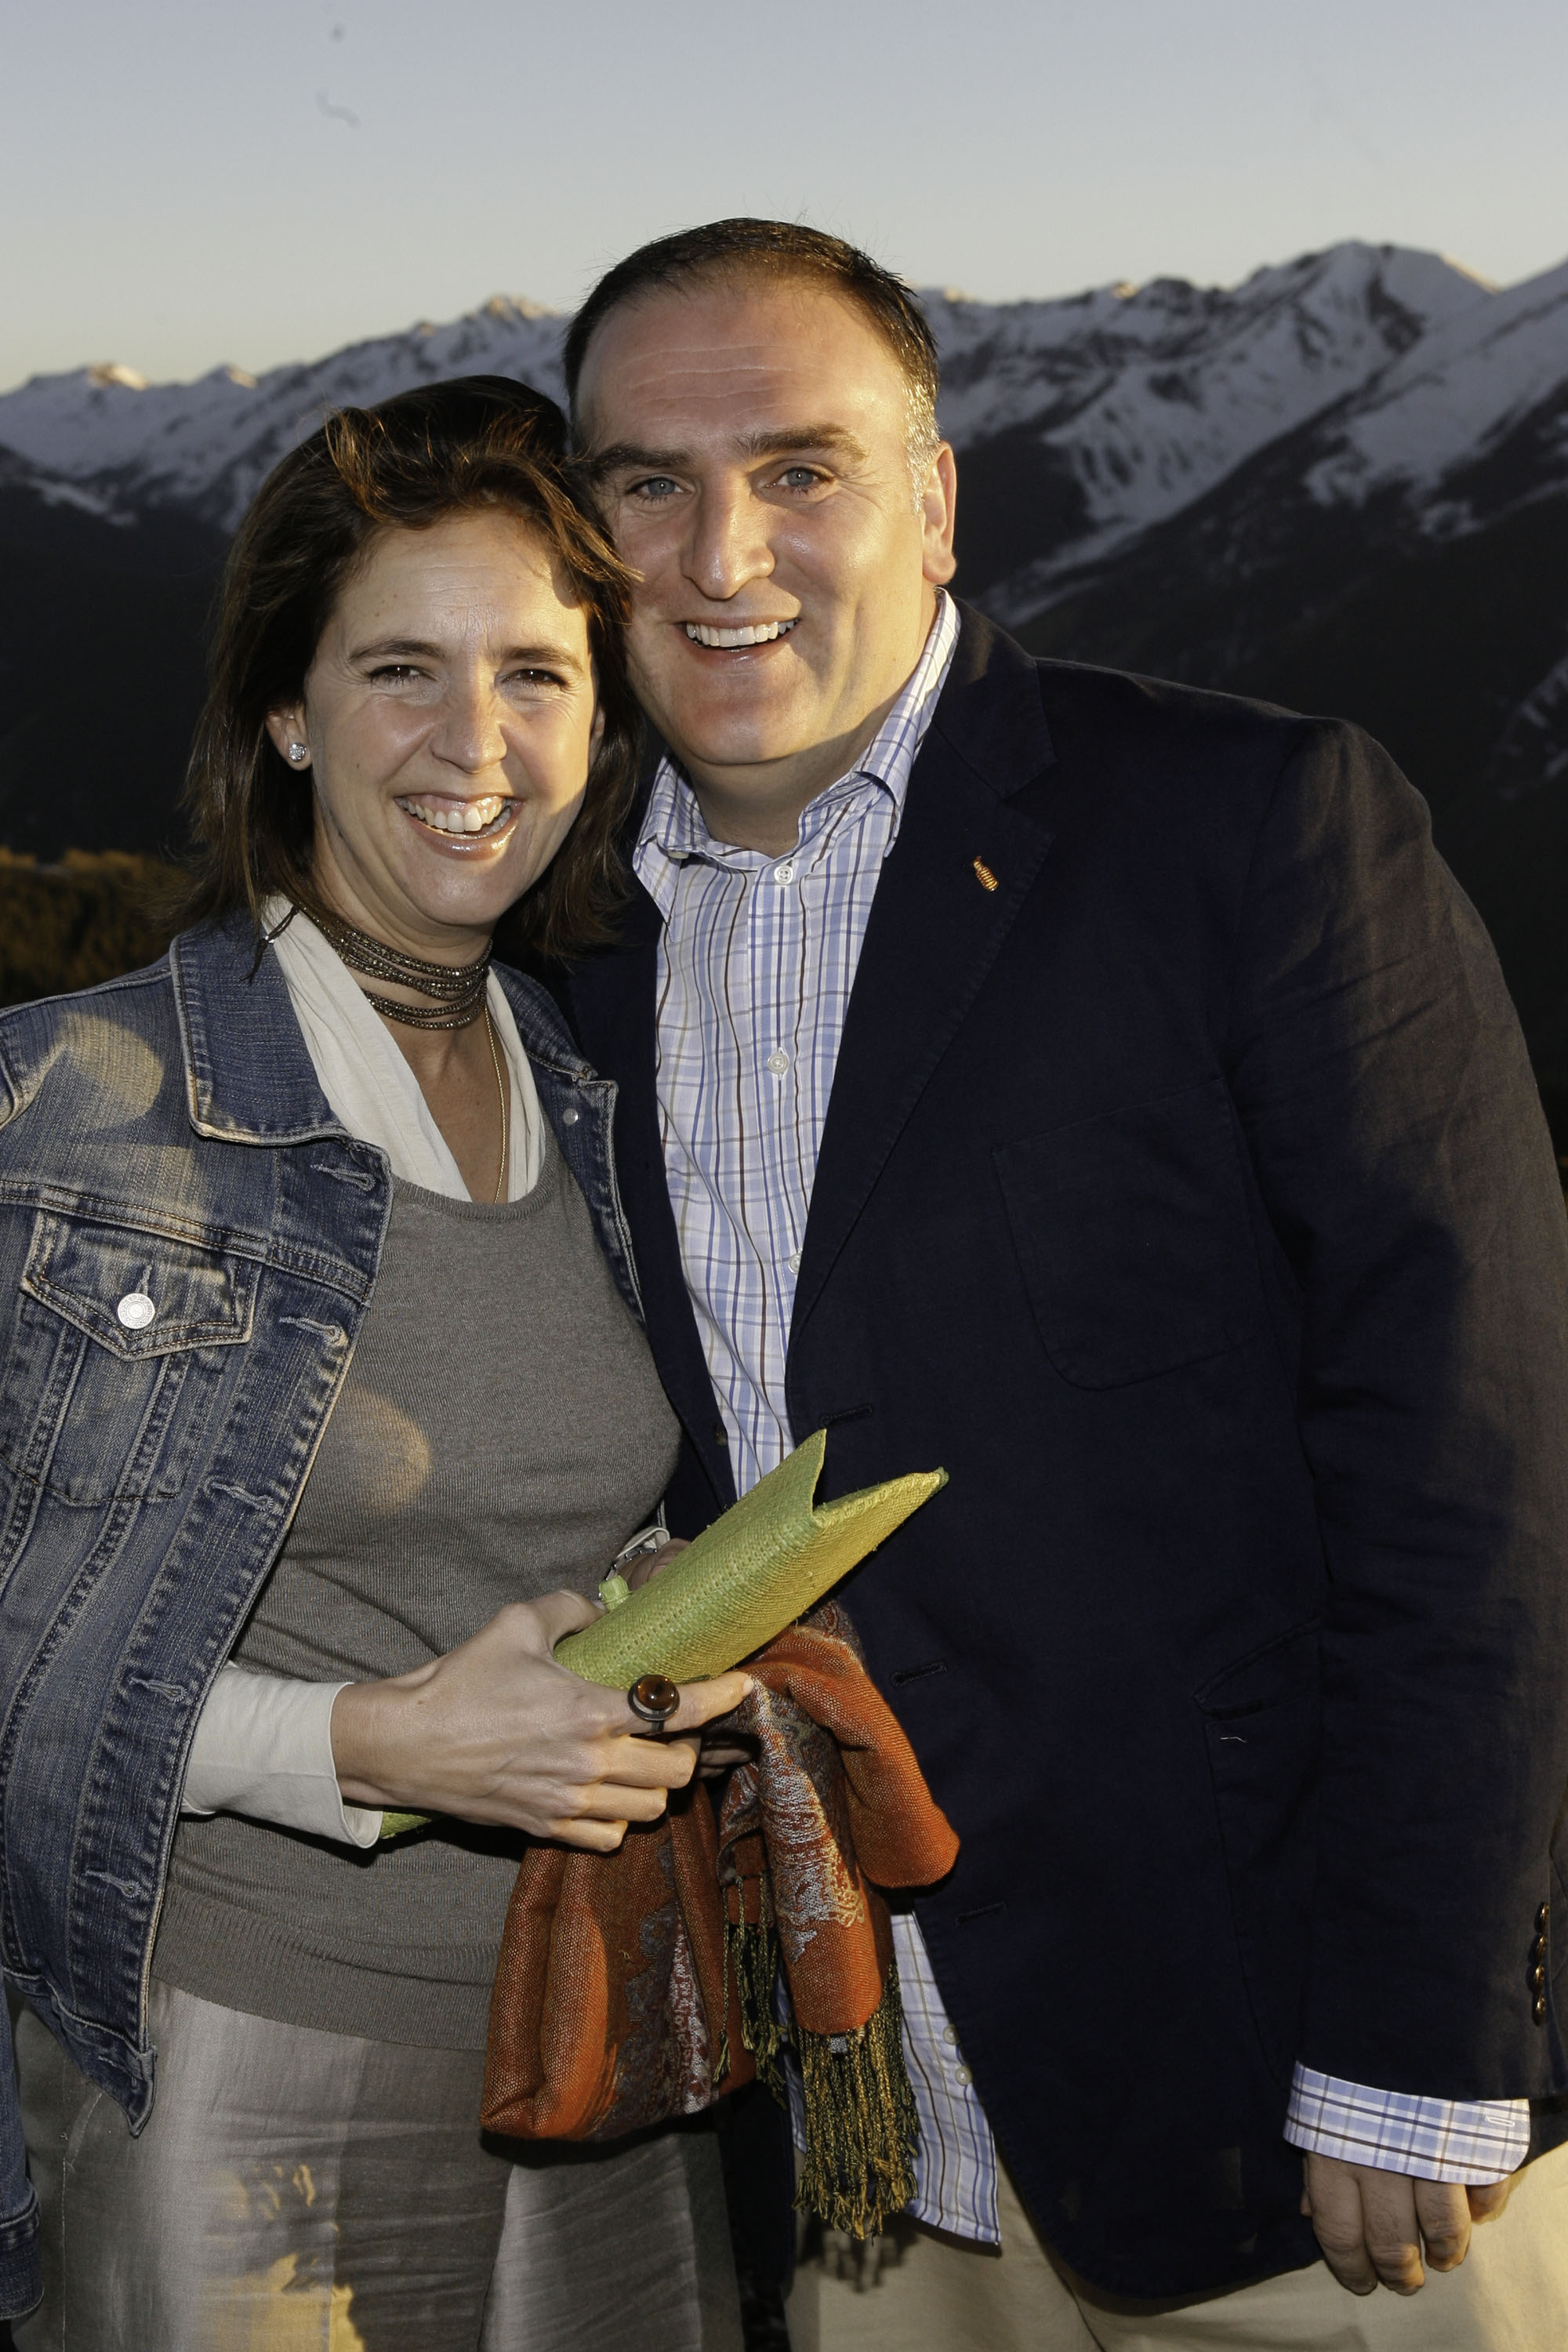 Patricia and José Andrés at the American Express Publisher’s Party on June 13, 2008, at Sundeck at the Top of Aspen Mountain in Aspen, Colorado